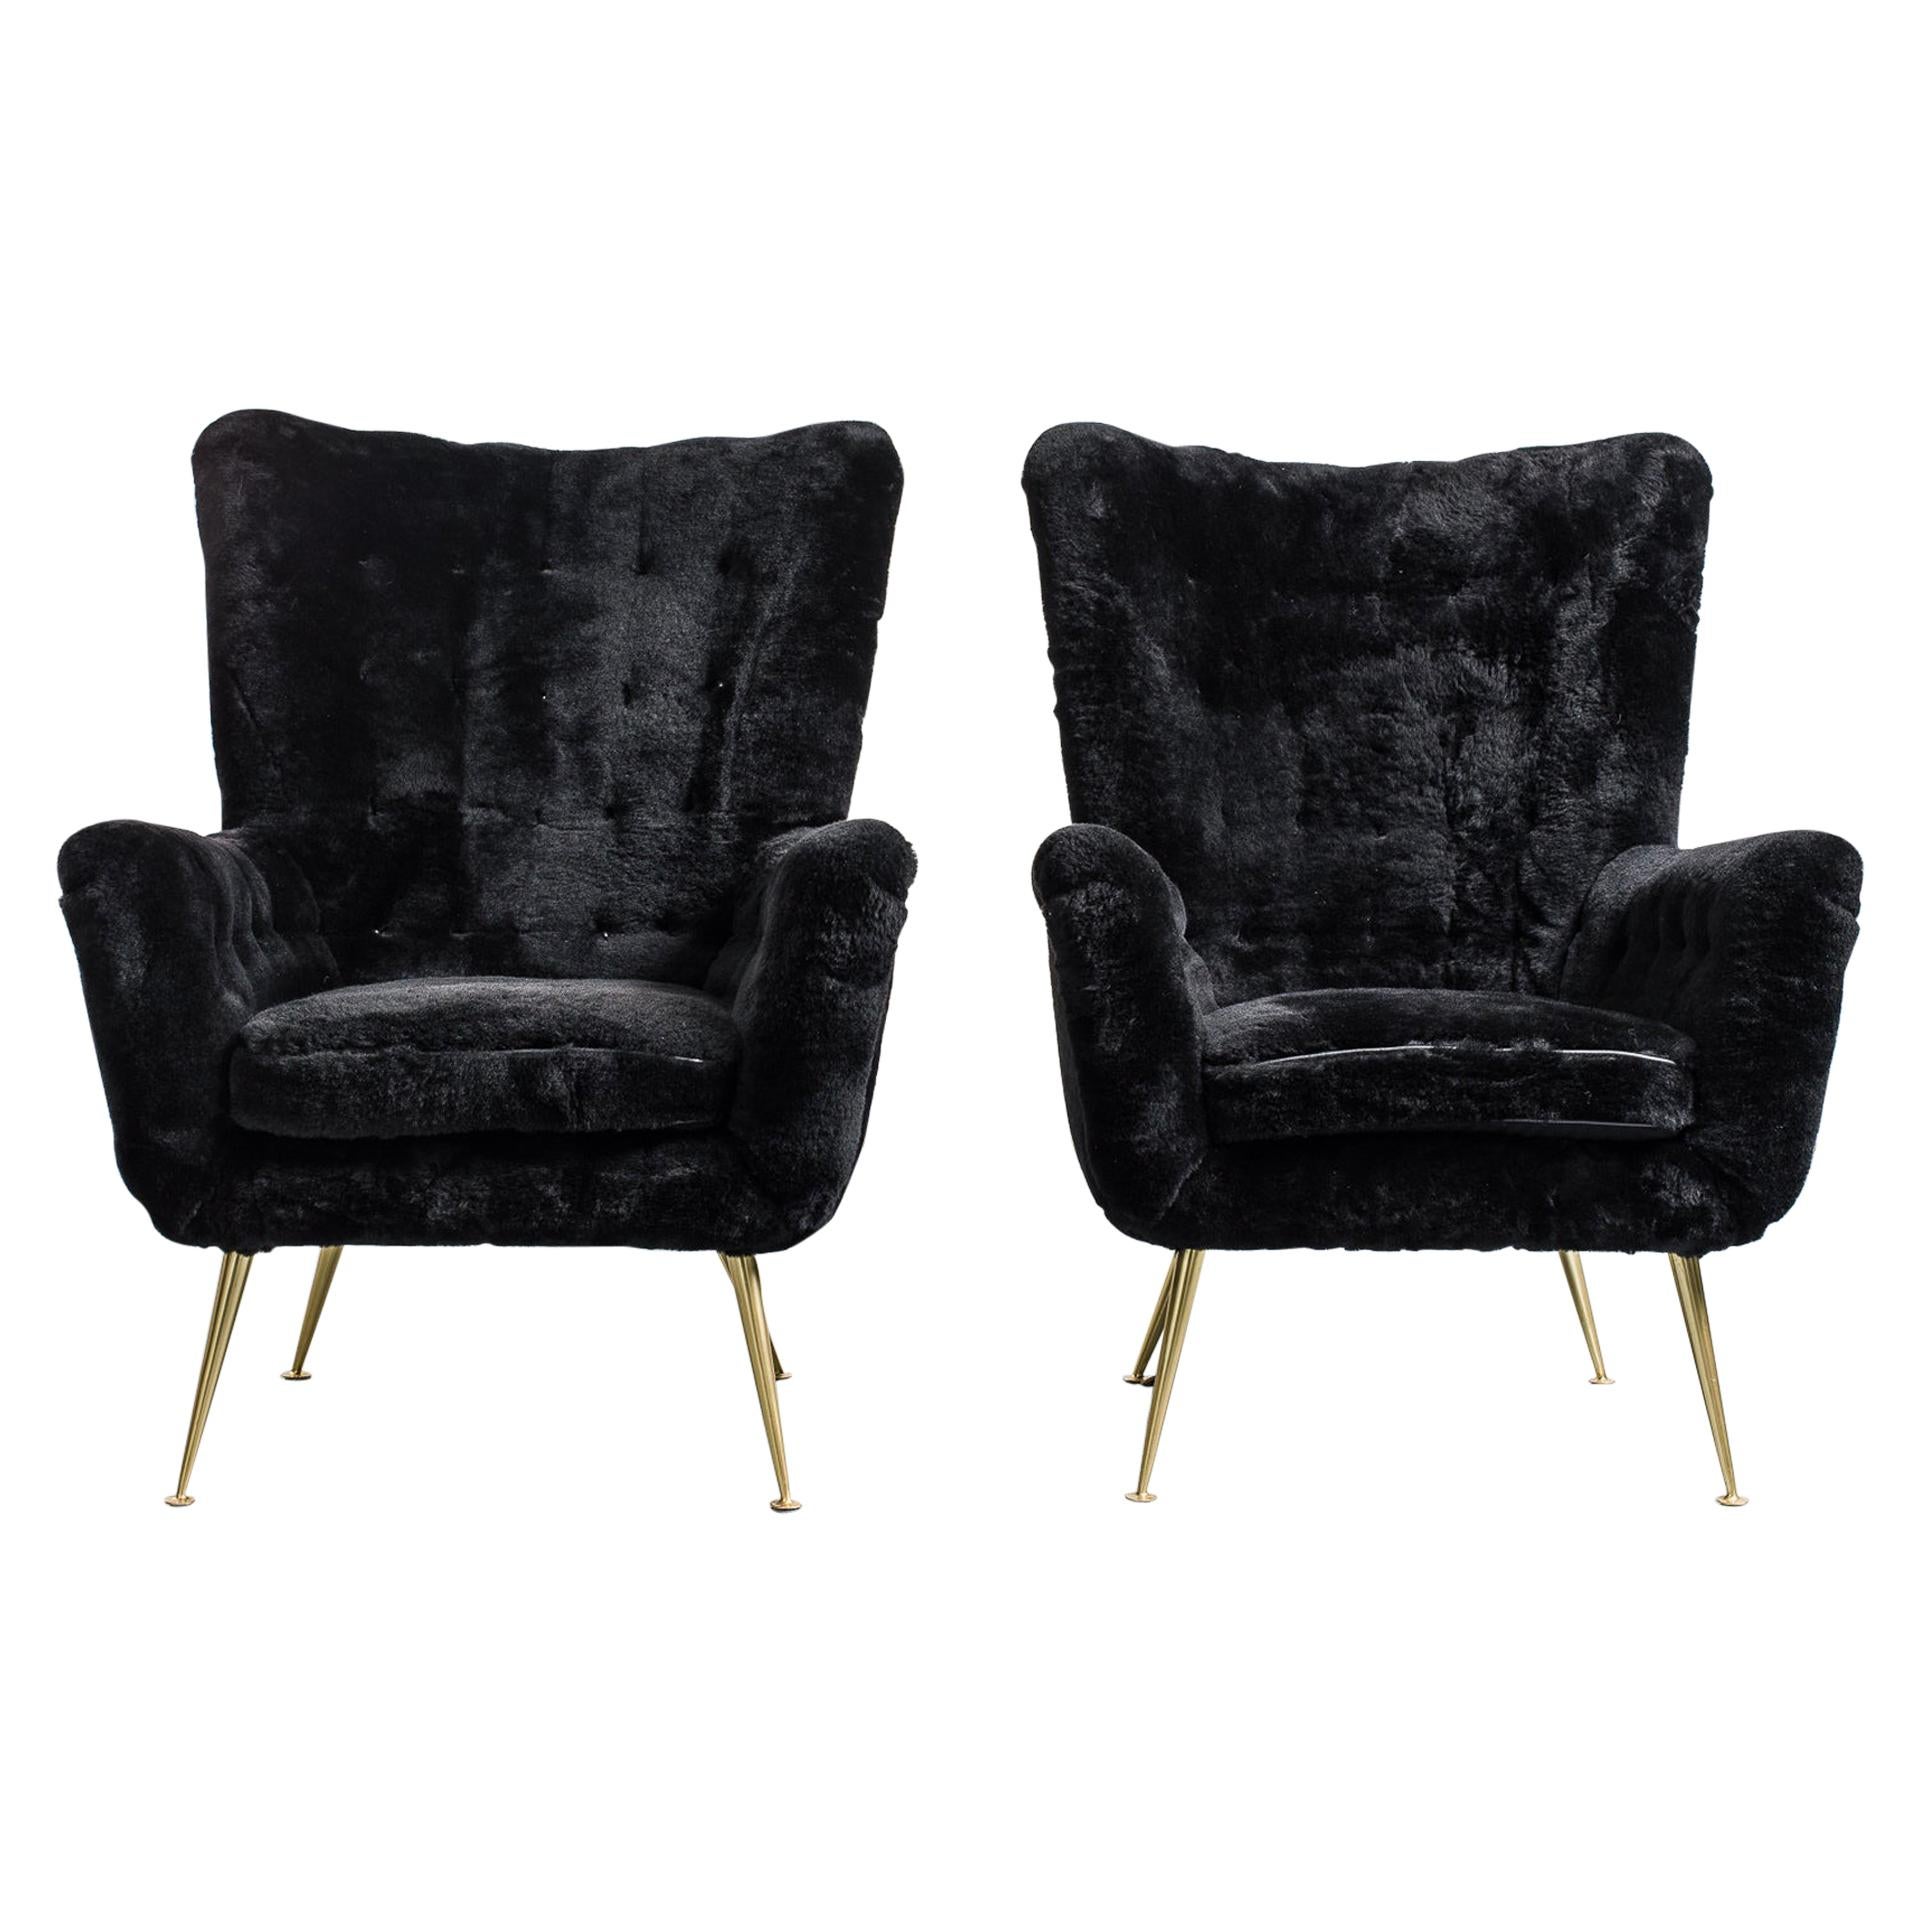 Pair of Italian Vintage Armchairs, Black Shearling Upholstery